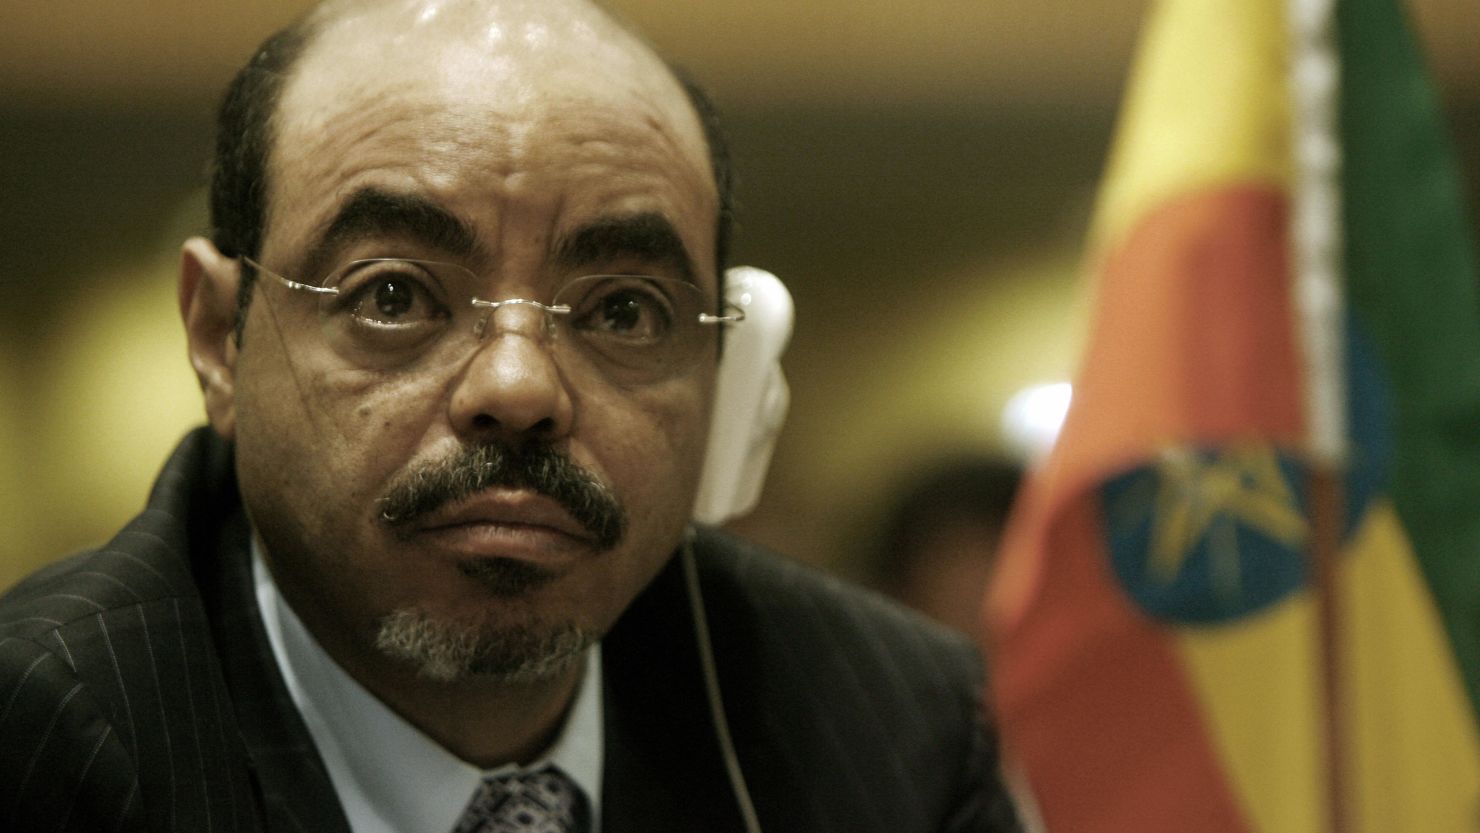 Meles Zenawi, the Prime Minister of Ethiopia, is considered a strong force in the frequently volatile horn of Africa. (File)